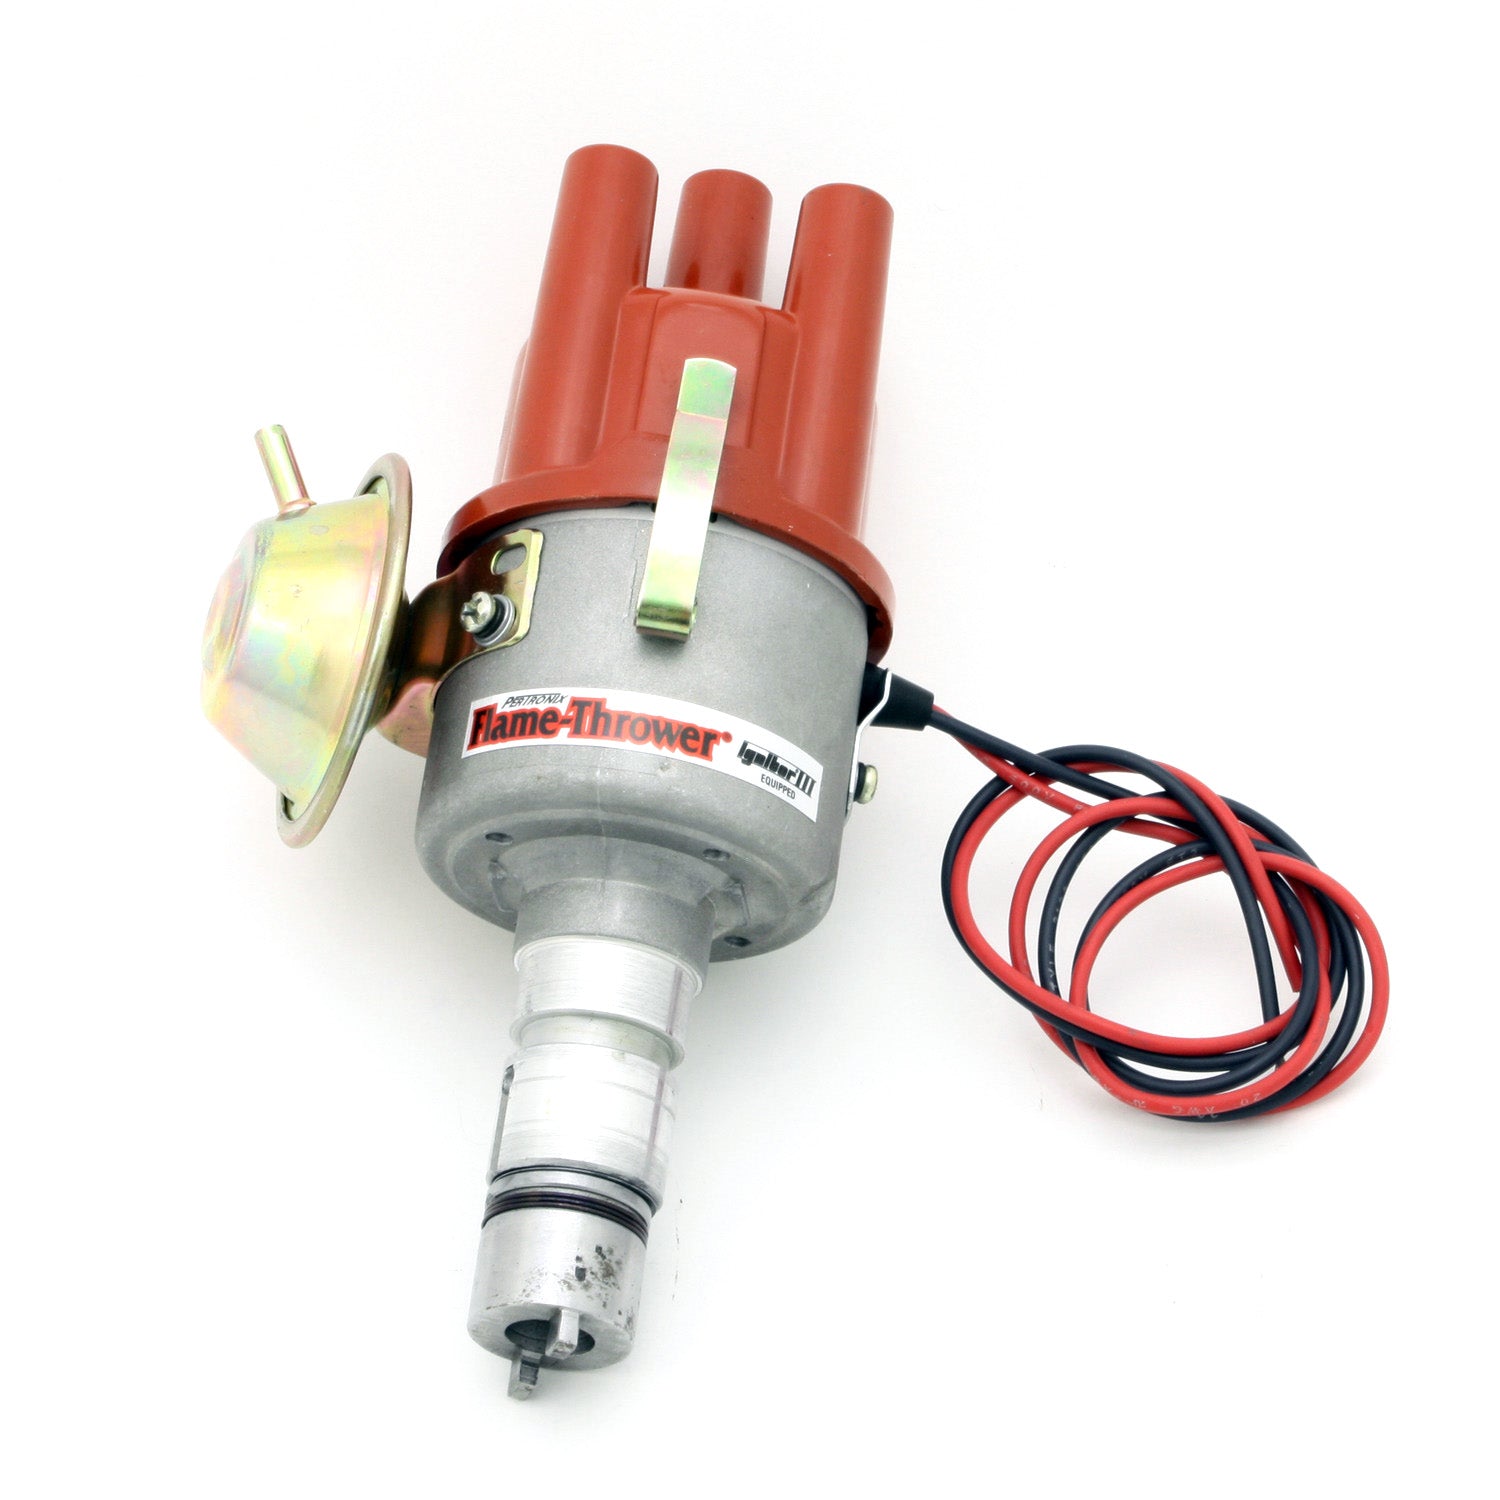 PerTronix D7181504 Flame-Thrower Electronic Distributor Cast Alfa Romeo Plug and Play with Ignitor III Vacuum Advance